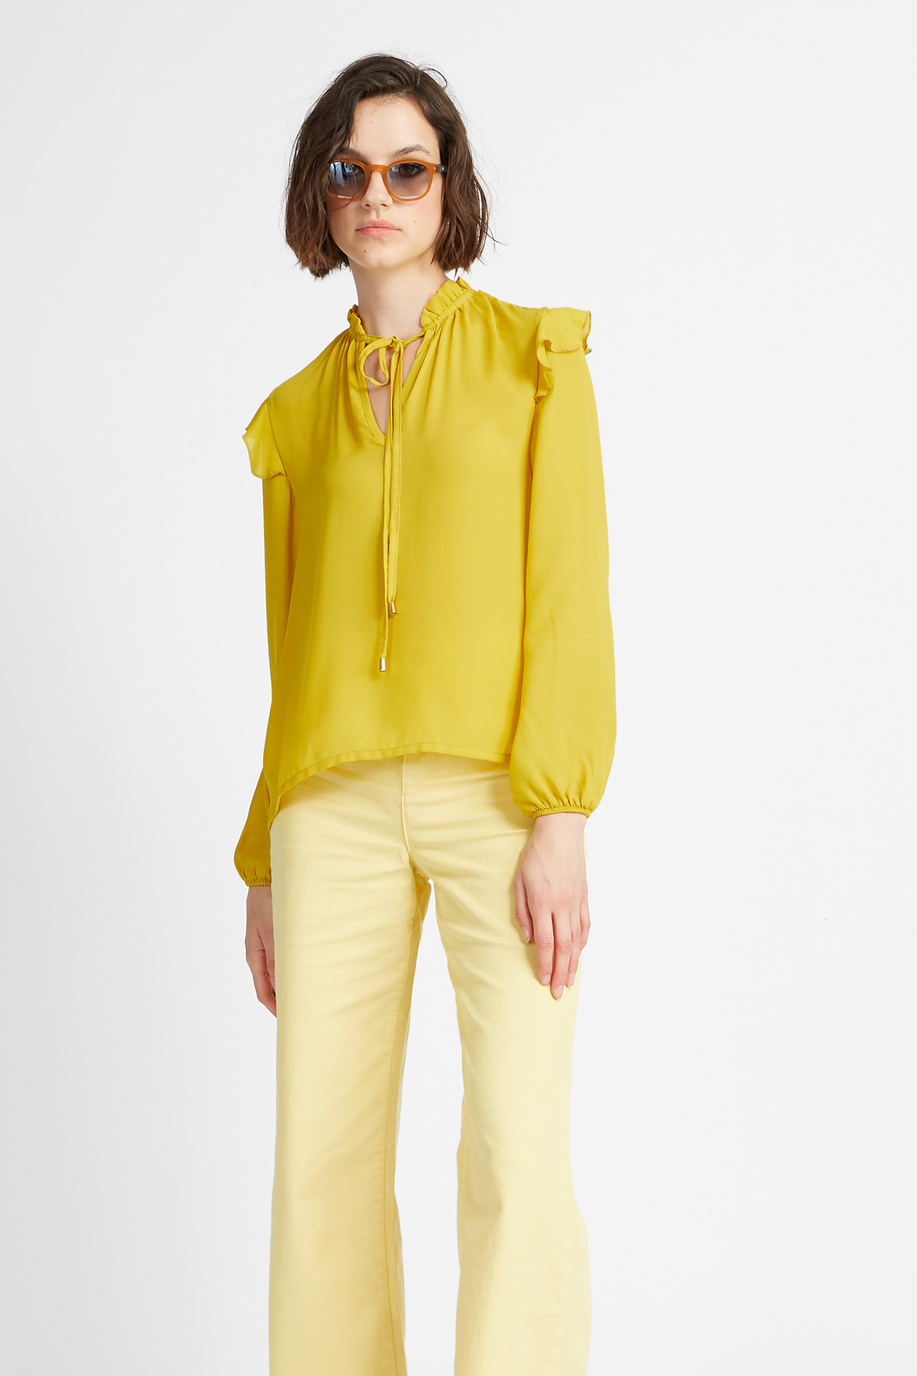 Women's long-sleeved shirt in solid color and georgette fabric Spring Weekend - Ville - Shirts | La Martina - Official Online Shop